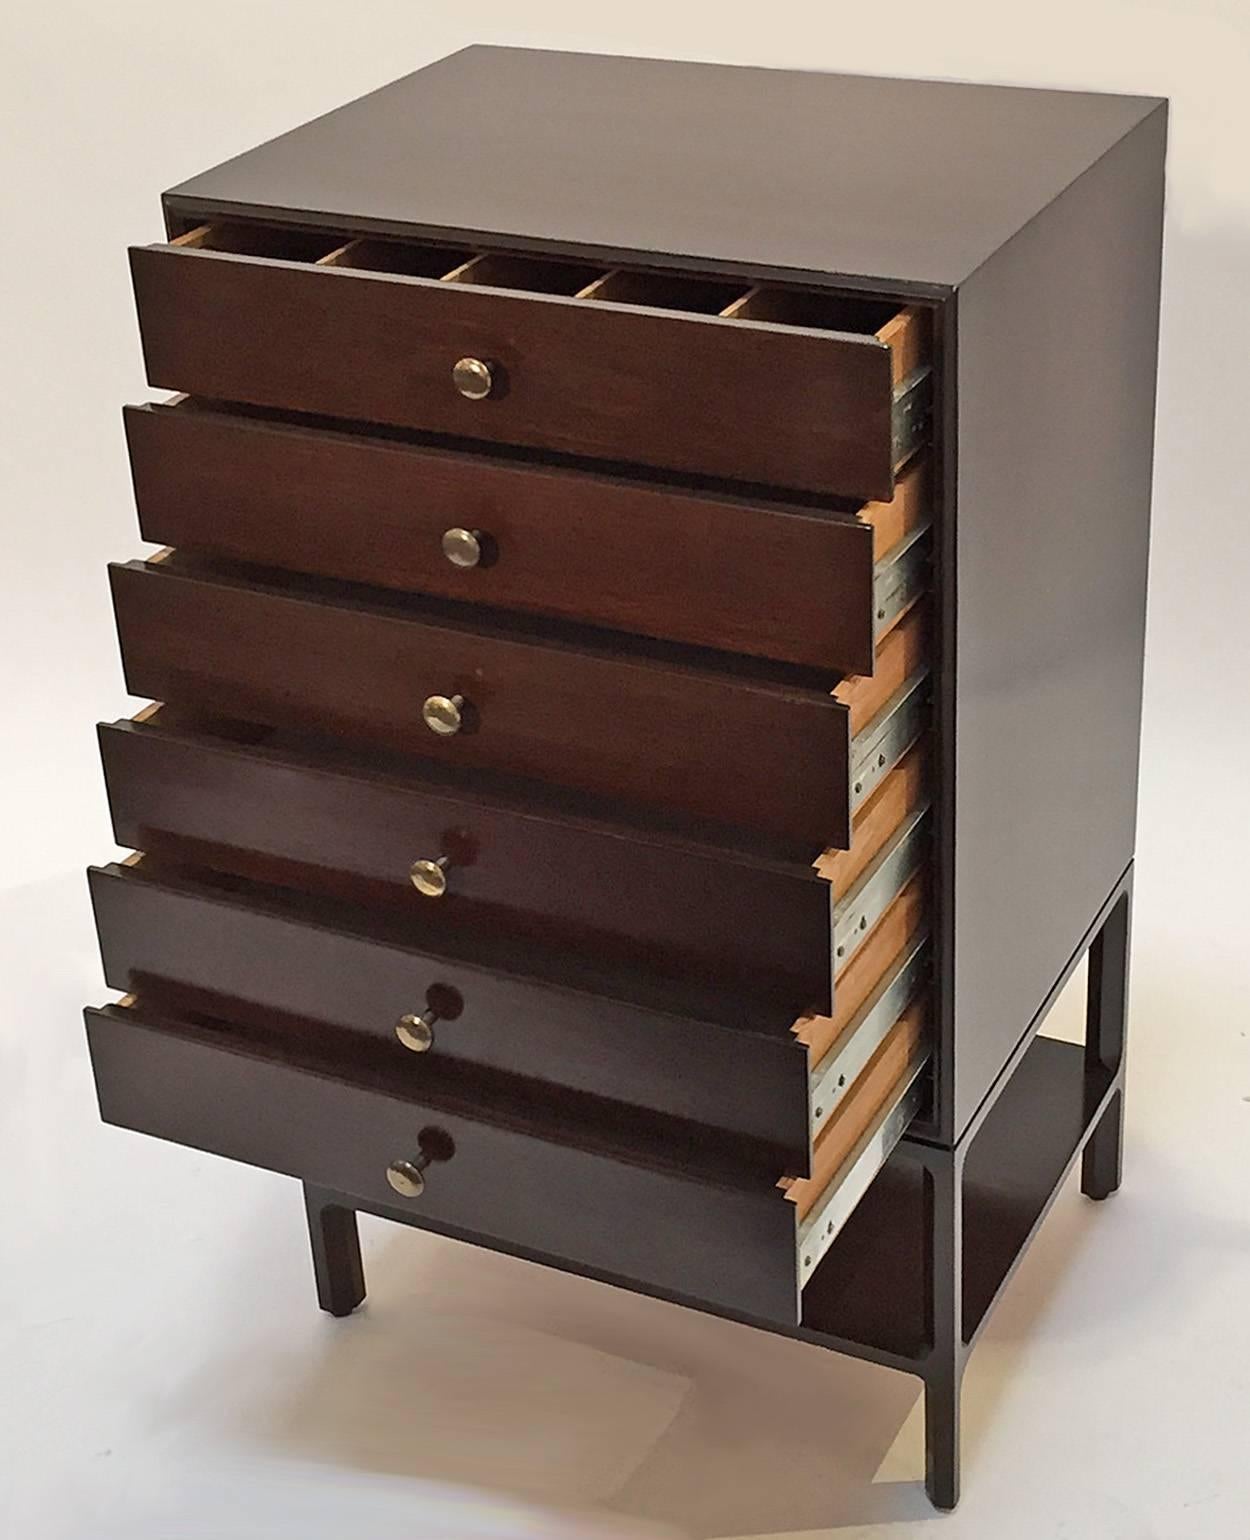 Small six-drawer dresser designed by Edward Wormley for Dunbar Furniture.
Features dark walnut with brass pulls. Retains the original Dunbar tag.
Top quality design and craftsmanship.